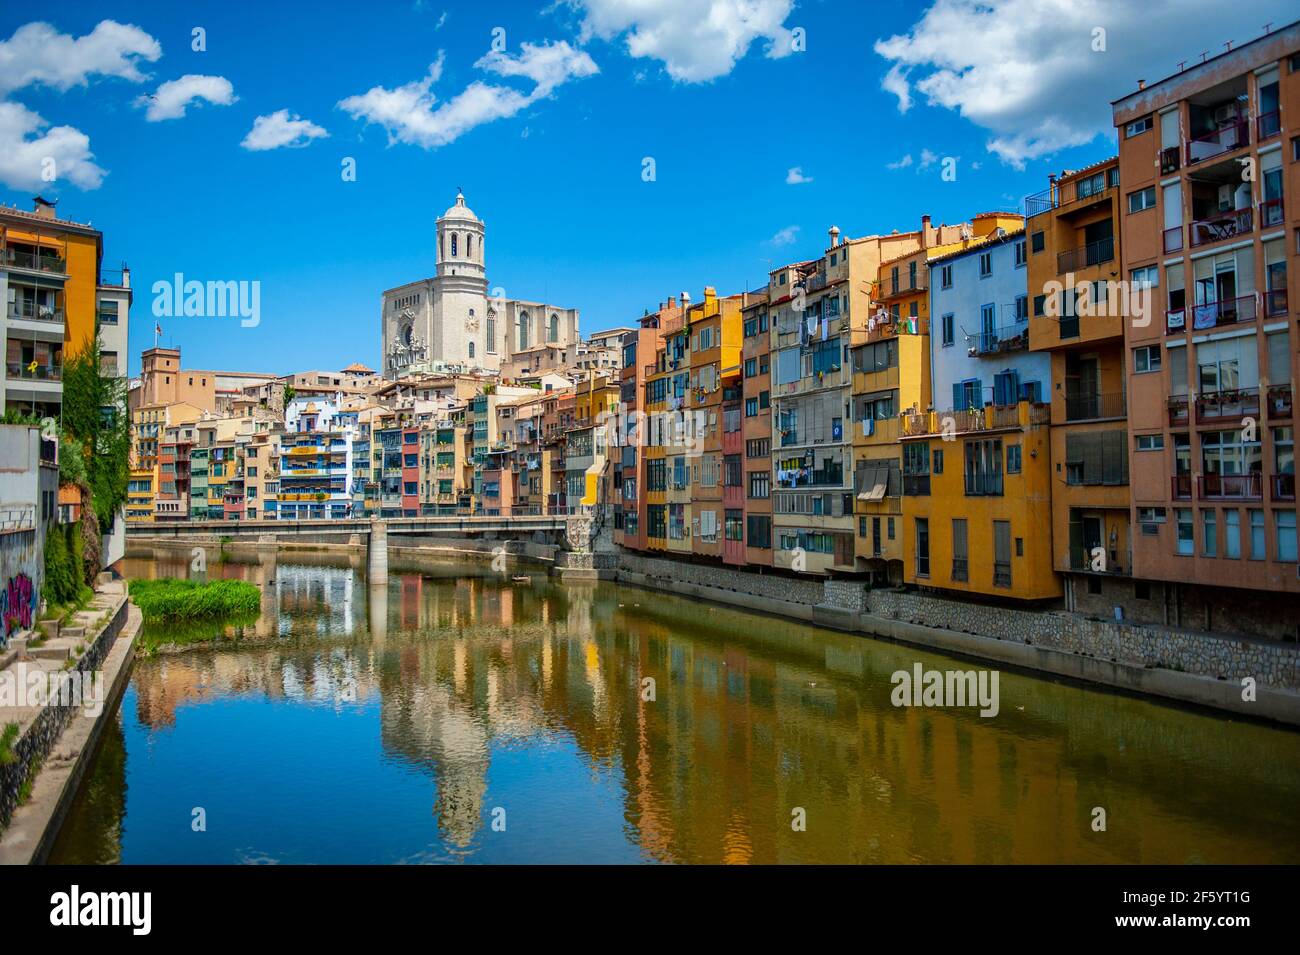 Girona, Spain - July 28, 2019: Beautiful colorful riverside houses in the Jewish quarter of Girona city in Catalunya, Spain, with Girona Cathedral in Stock Photo